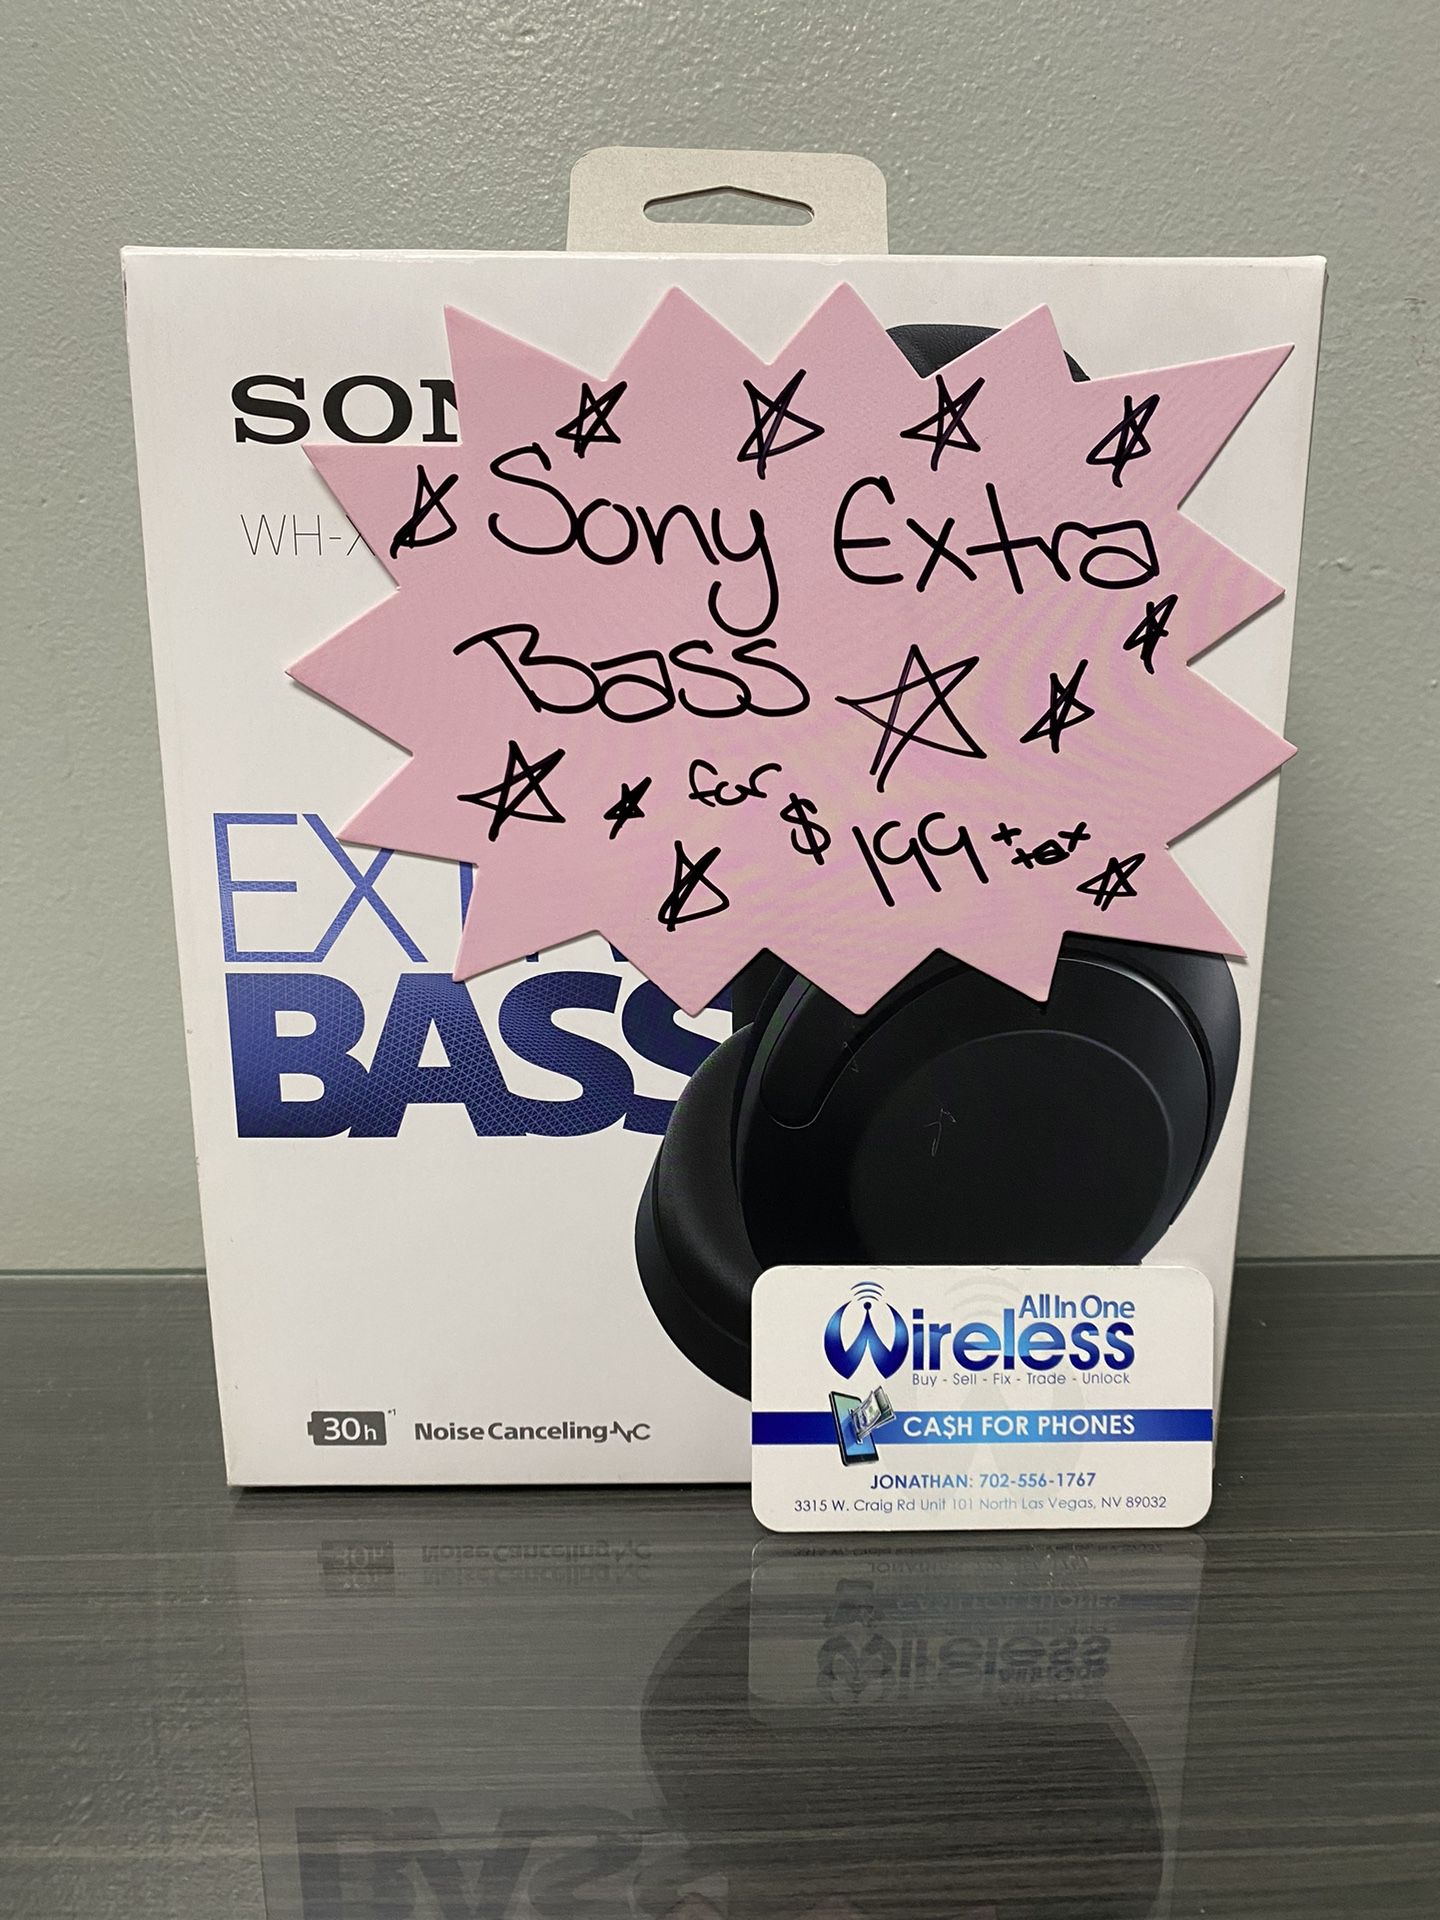 Sony WH-XB910N EXTRA BASS Noise Cancelling Headphones